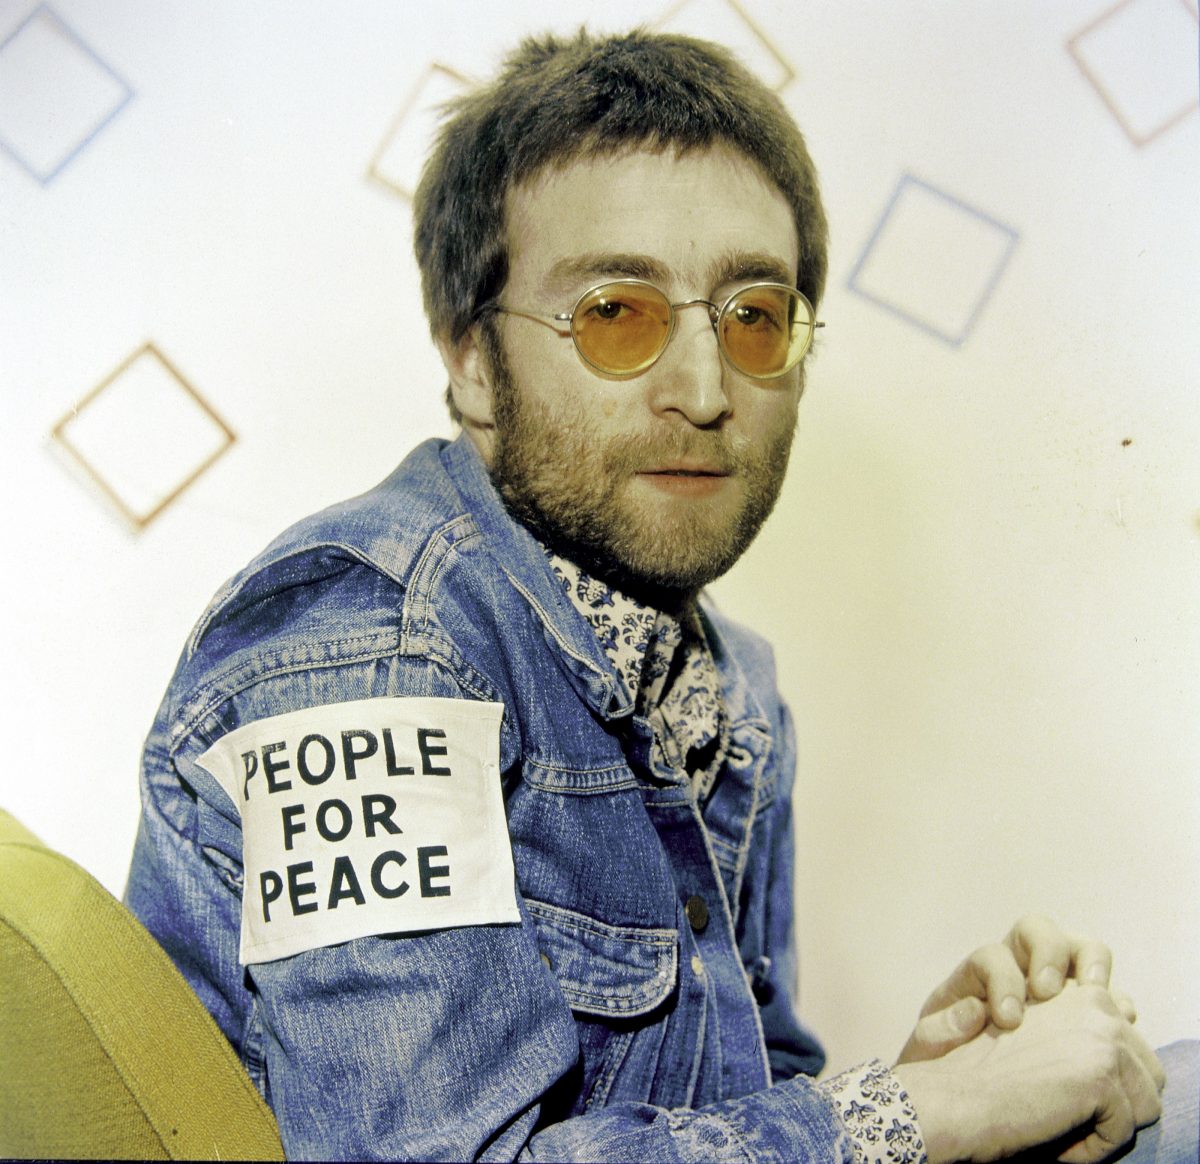 John Lennon wearing yellow glasses during The Beatles "So be it" time